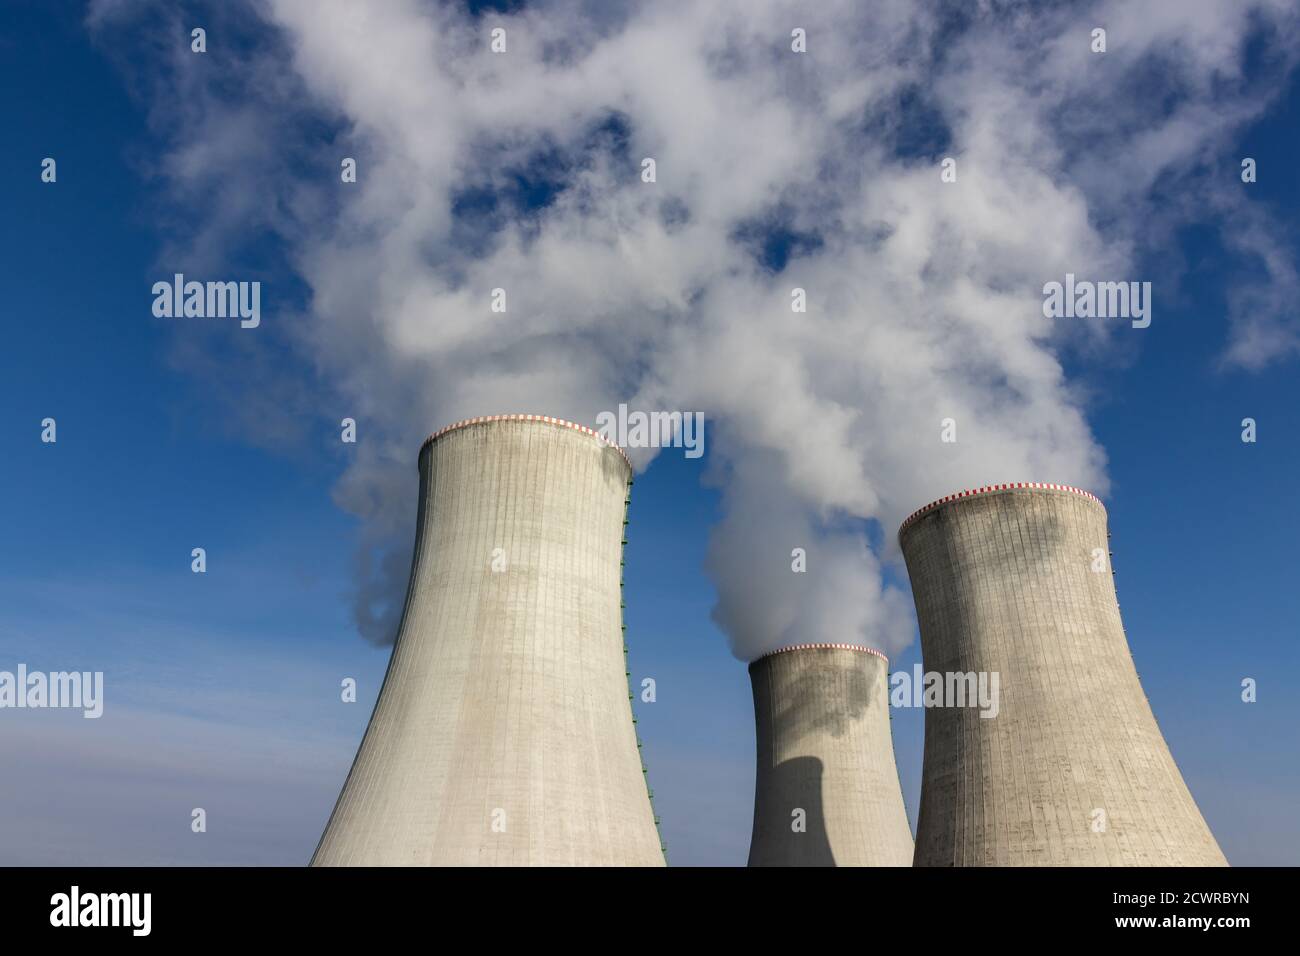 Cooling towers of a nuclear power plant Stock Photo